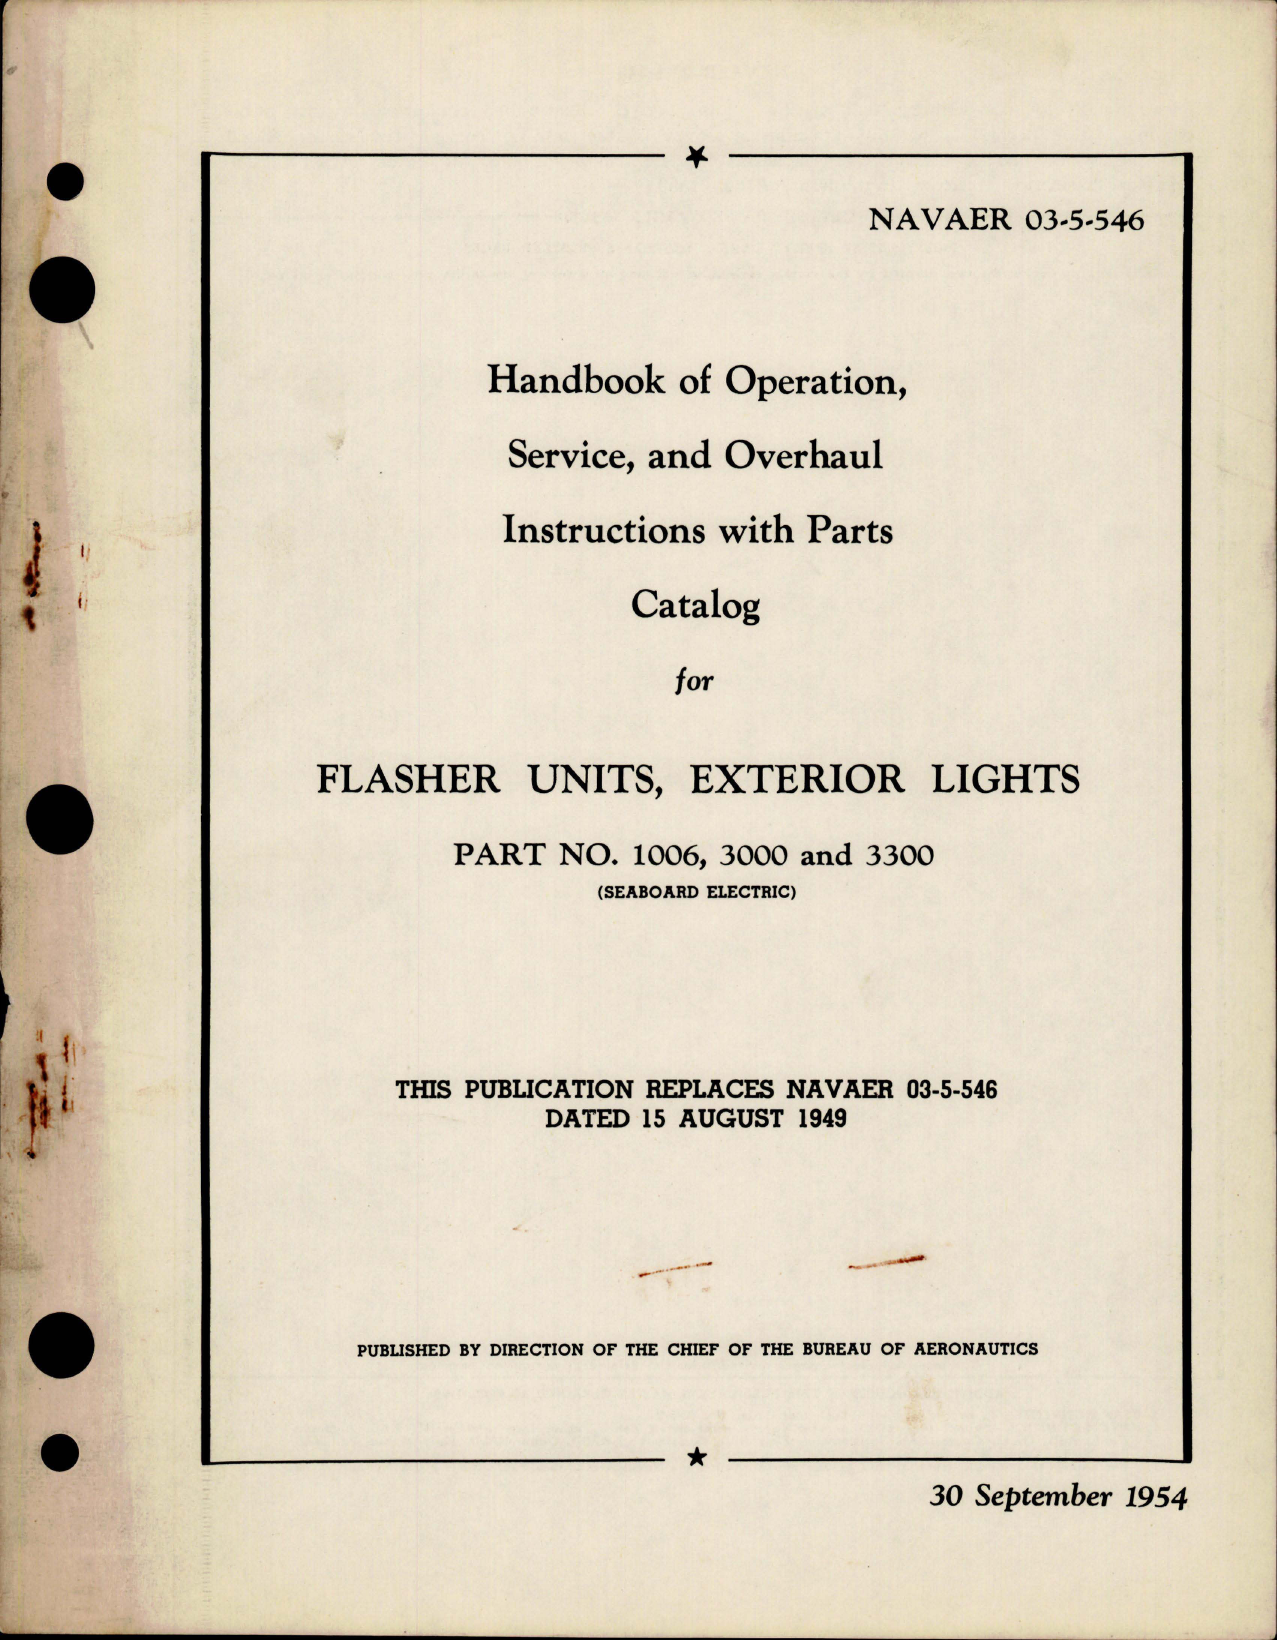 Sample page 1 from AirCorps Library document: Operation, Service and Overhaul with Parts for Exterior Lights - Flasher Units - Parts 1006, 300, 3300 